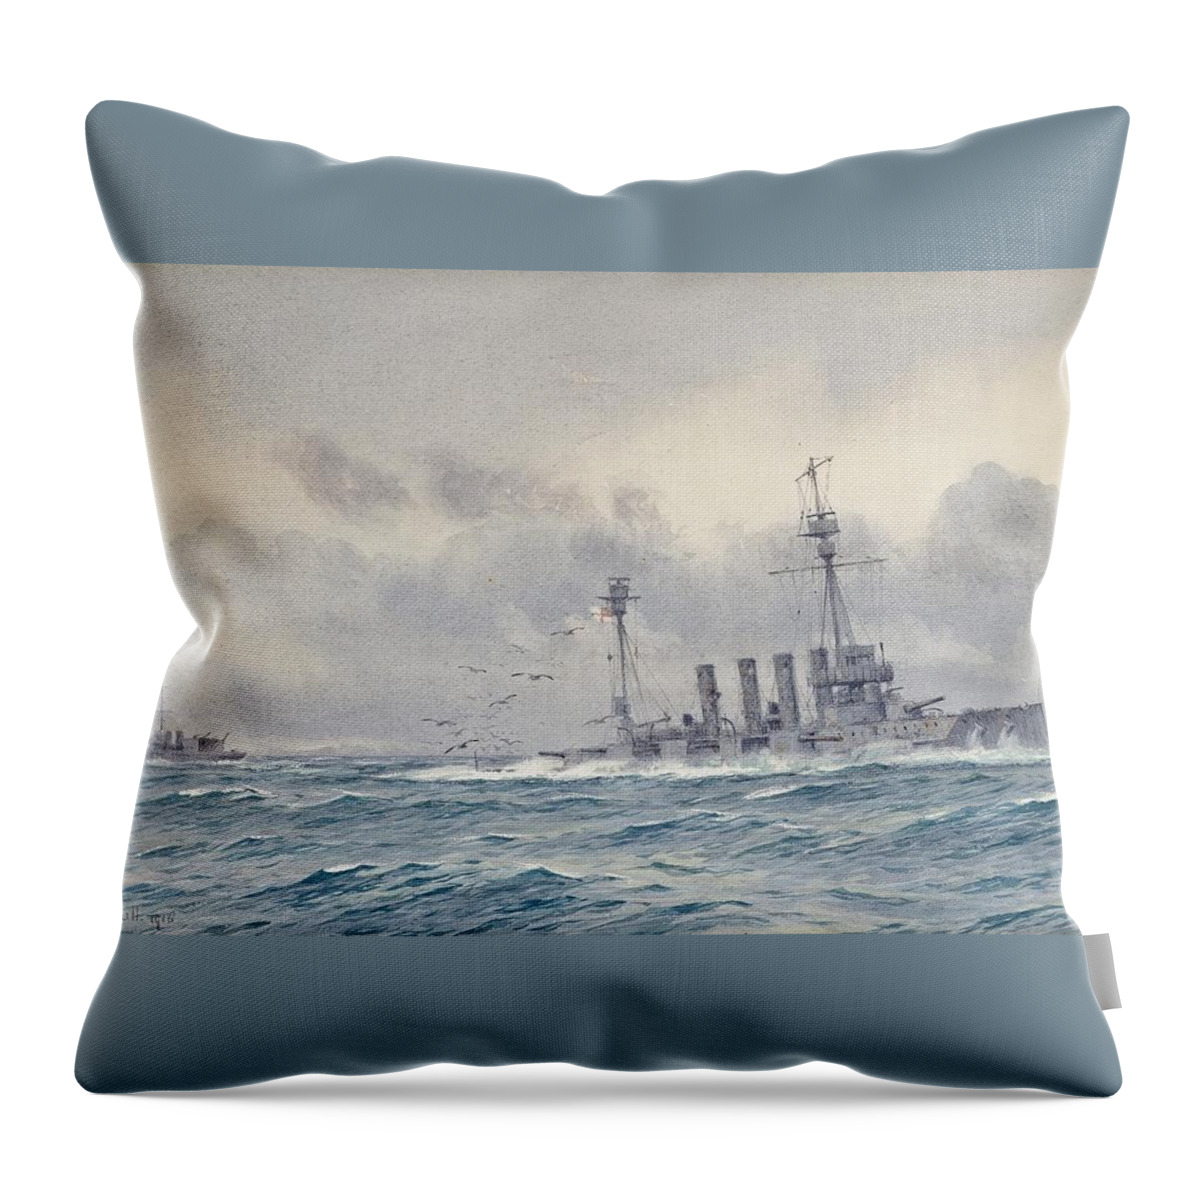 Alma Claude Burlton Cull (1880-1931) The Sinking Of H.m.s. Warrior After The Battle Of Jutland Throw Pillow featuring the painting Warrior after the Battle of Jutland by MotionAge Designs